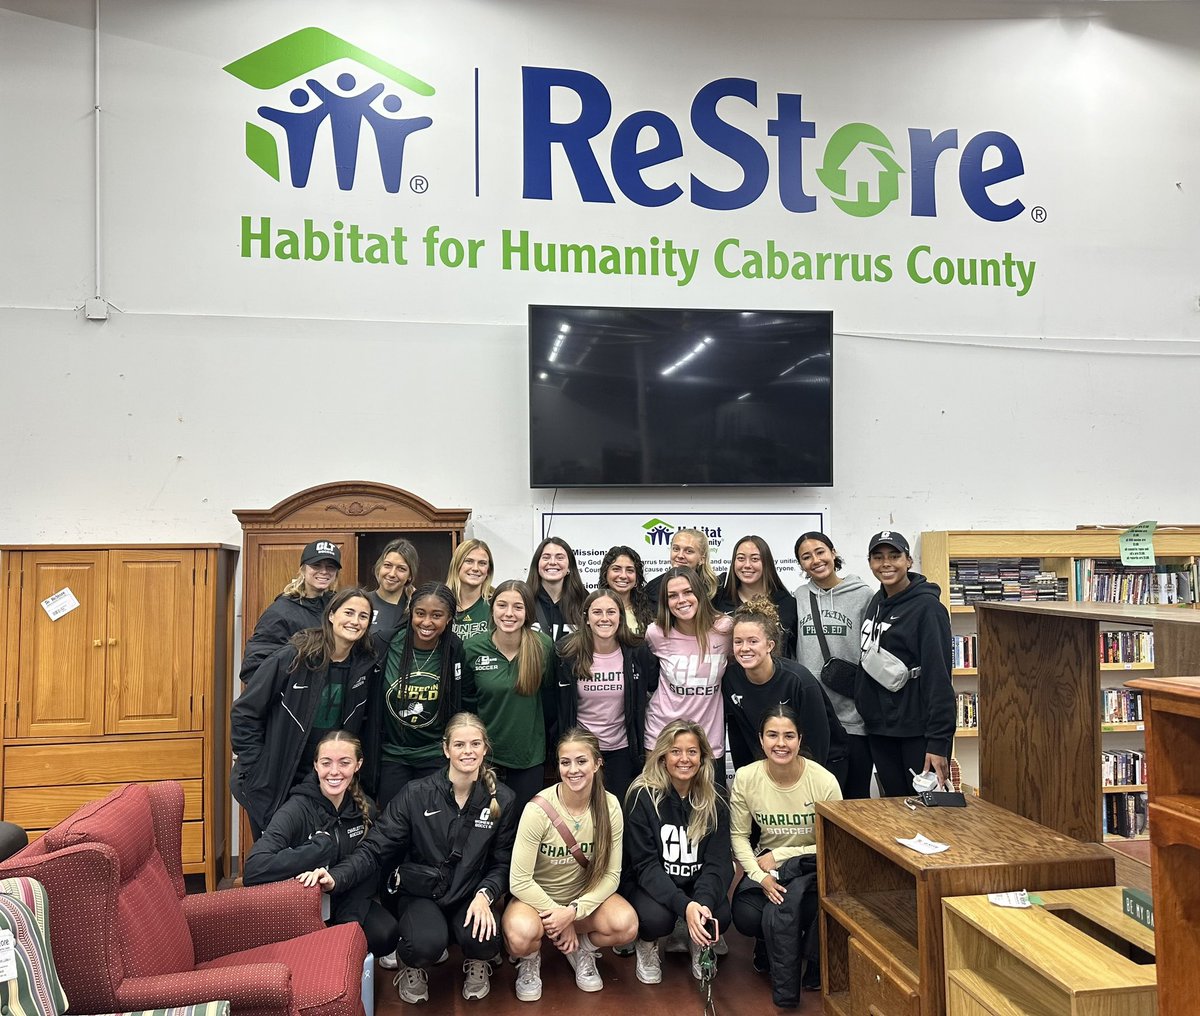 Both our Men’s and Women’s soccer teams spent their Saturday morning serving the Charlotte community. The Men’s team helped pick up 503lbs of trash on the Charlotte campus! The Women’s team spent their time serving at the Habitat For Humanity Restore! #goldstandard #community